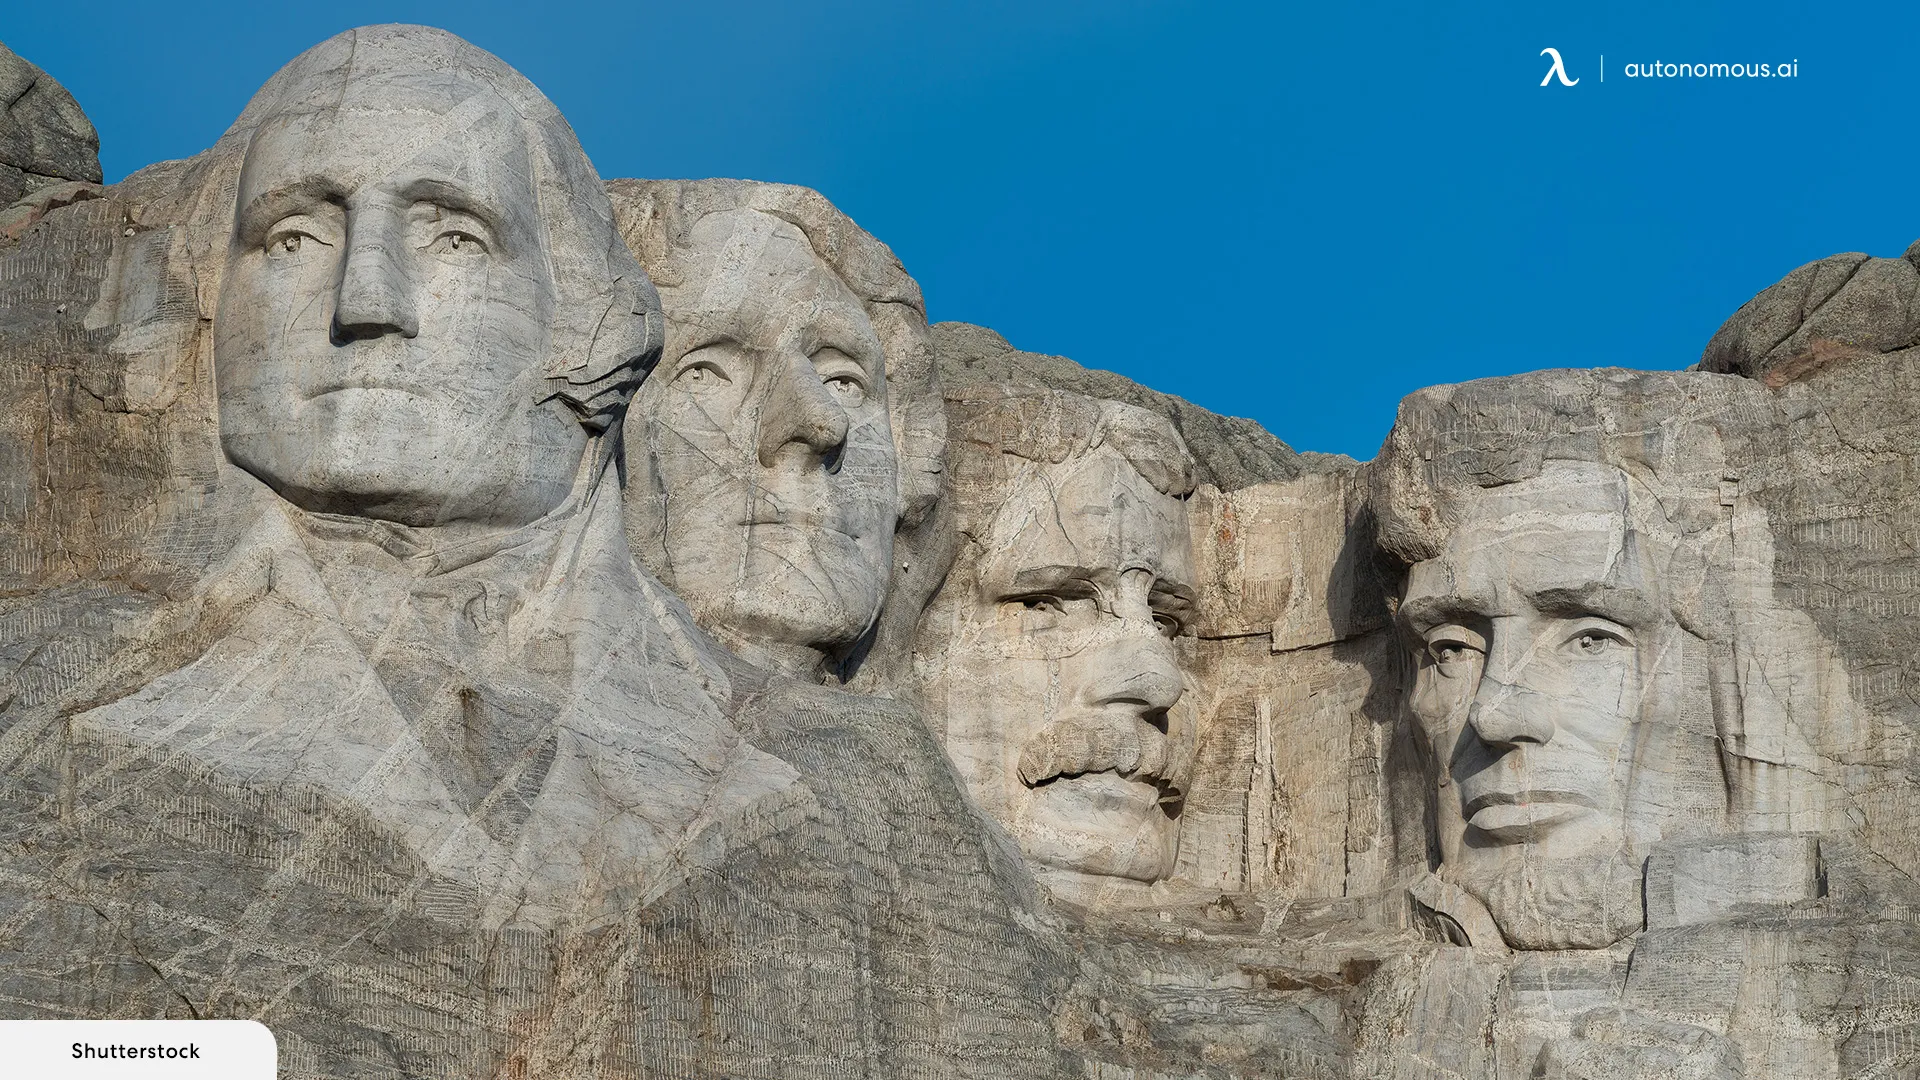 Presidents' Day Never Falls on the Actual Birthday of a President